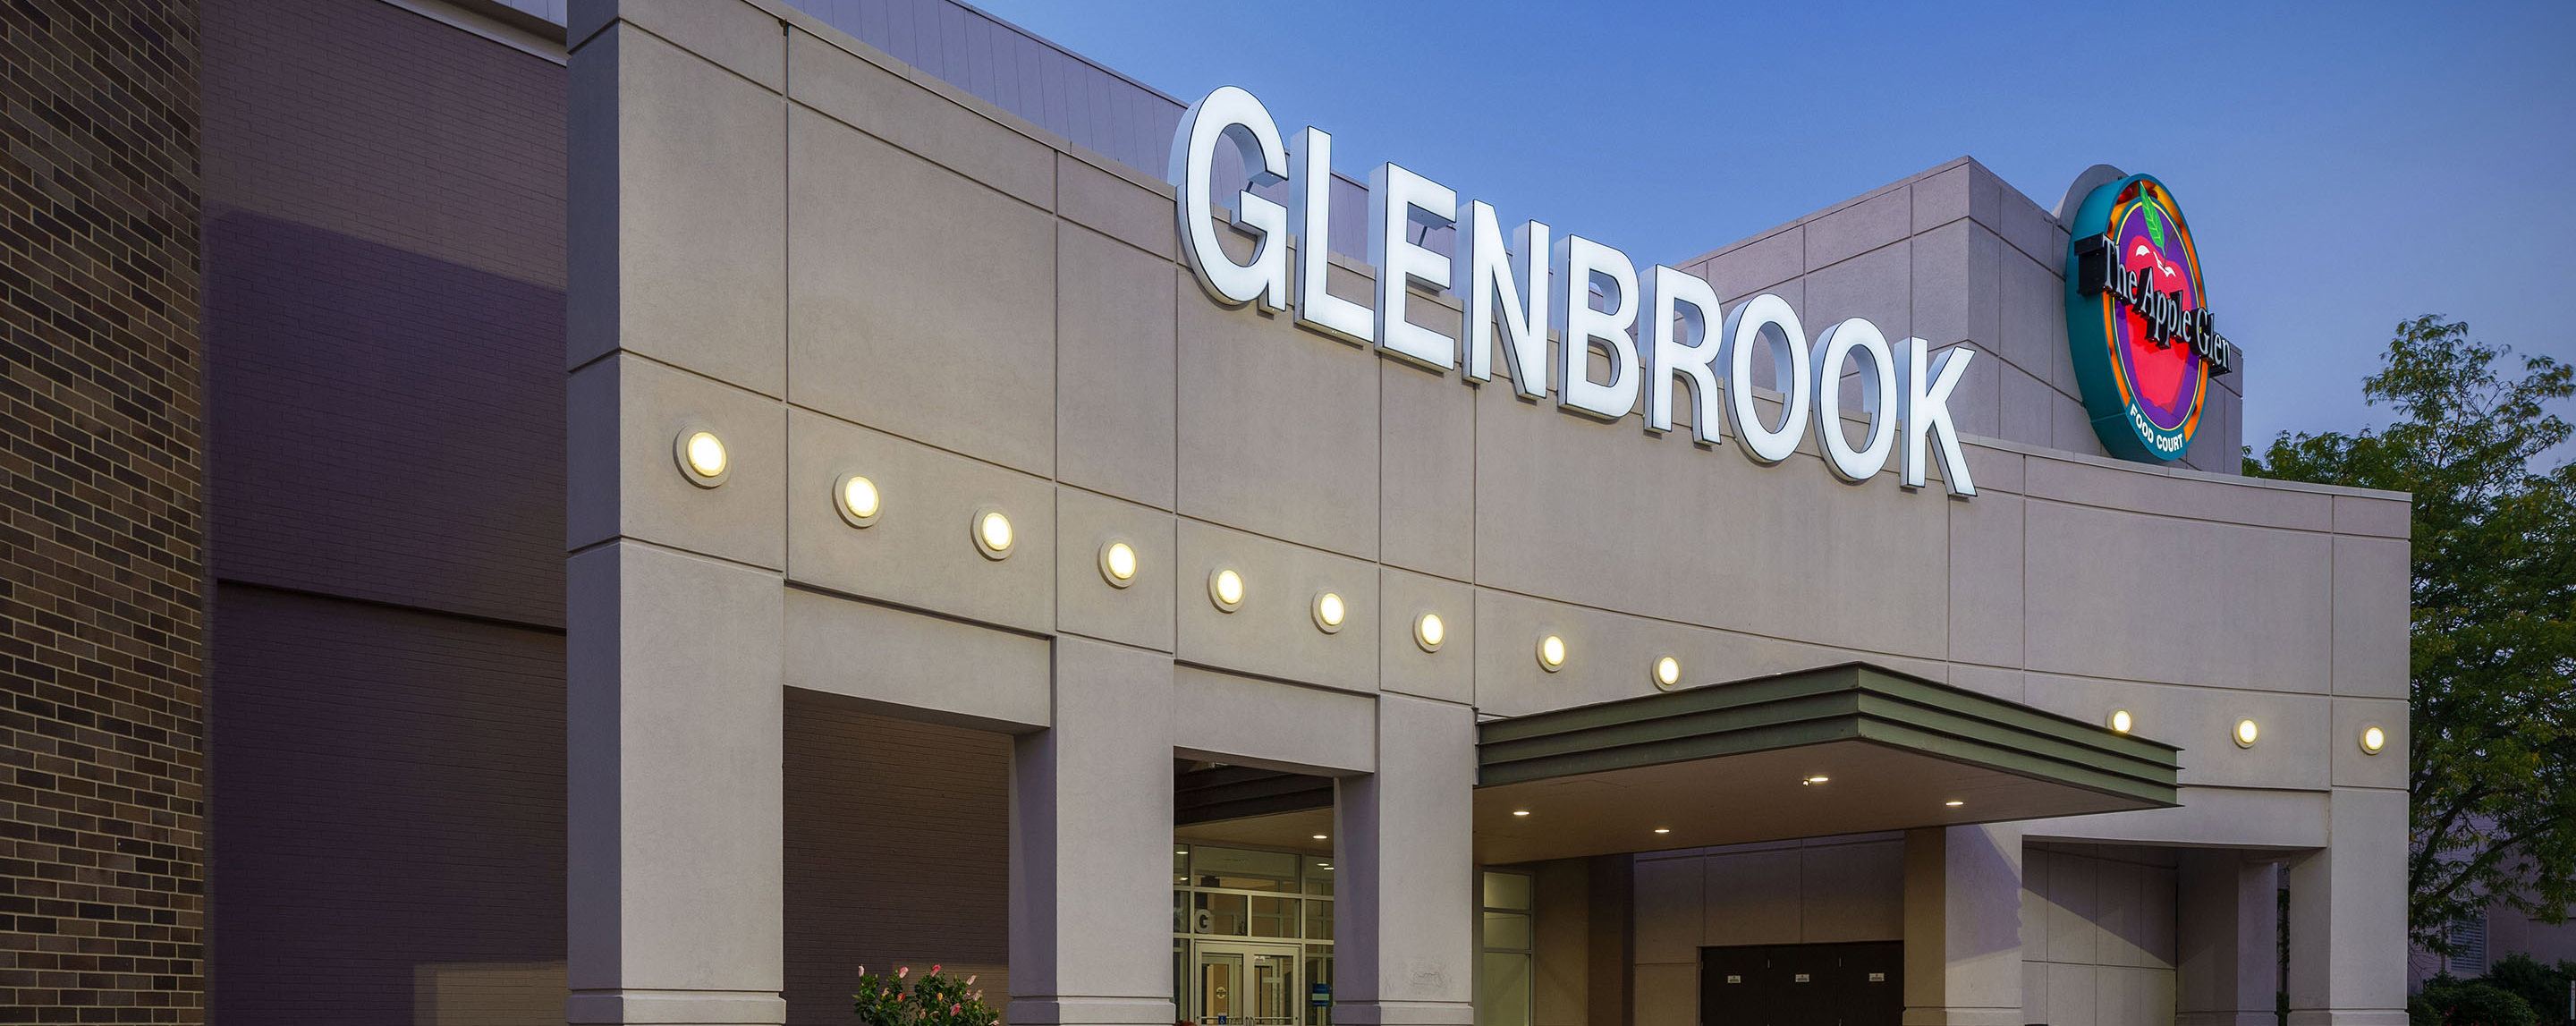 A sign reading The Apple Glen Food Court is attached to a building that says Glenbrook.